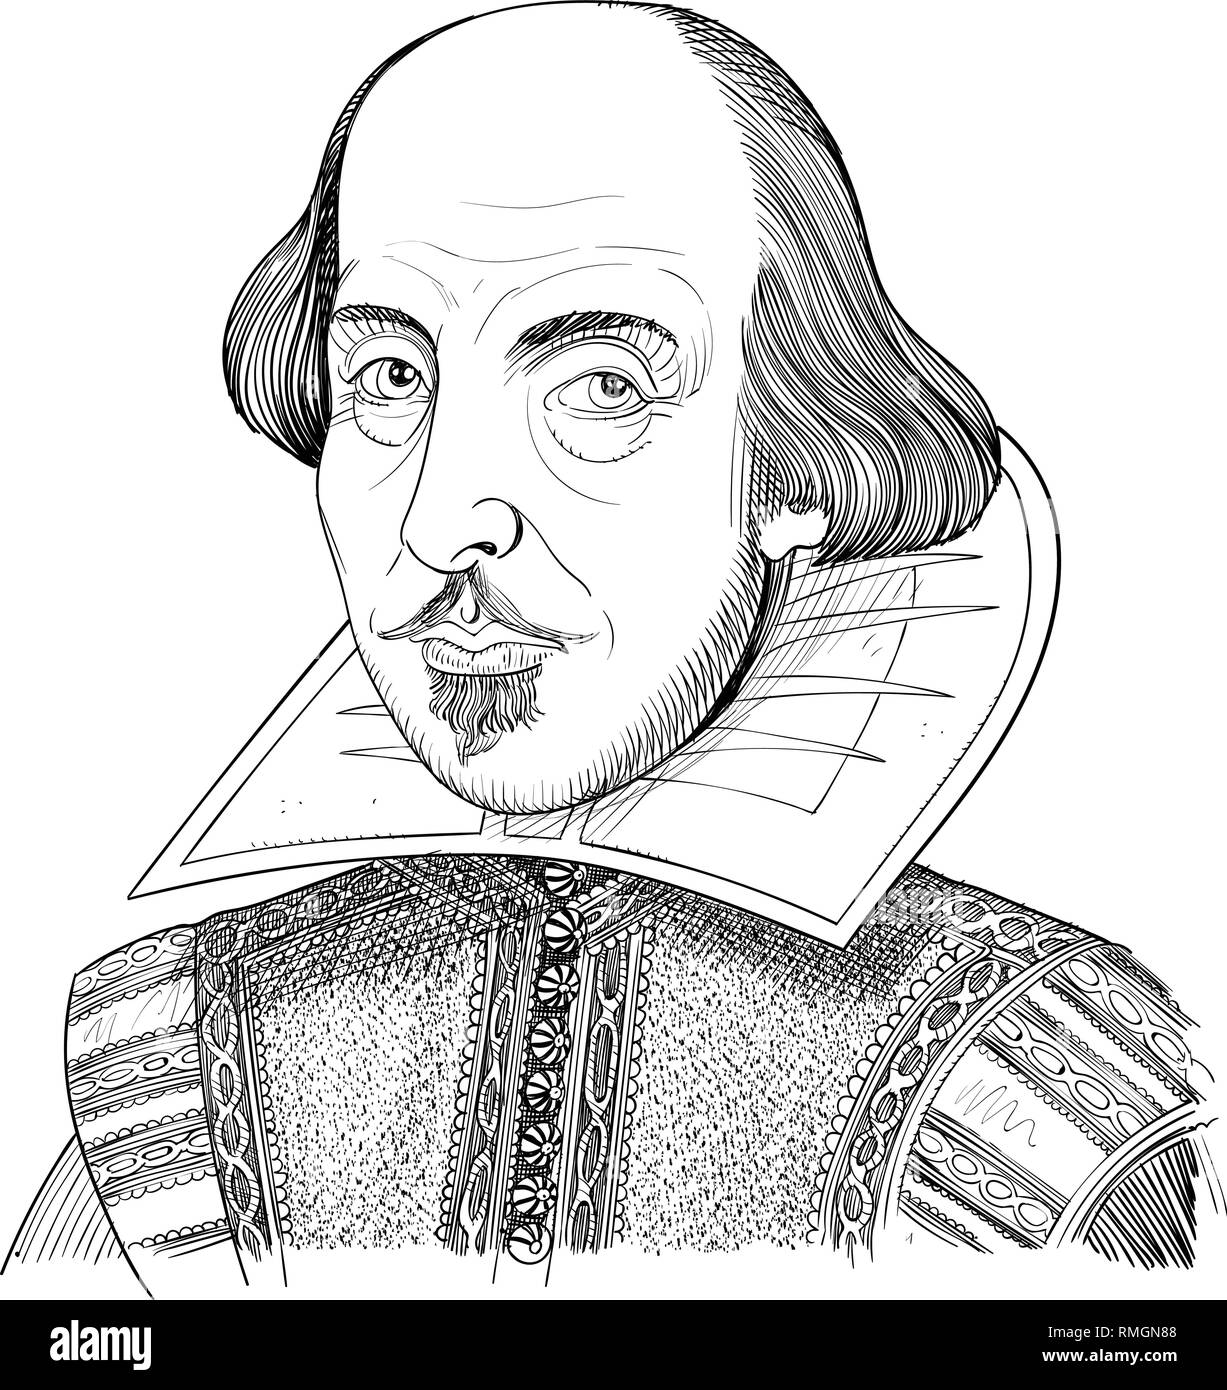 William Shakespeare portrait in line art illustration. He was English poet, playwright, actor, regarded as the greatest author in English literature. Stock Vector